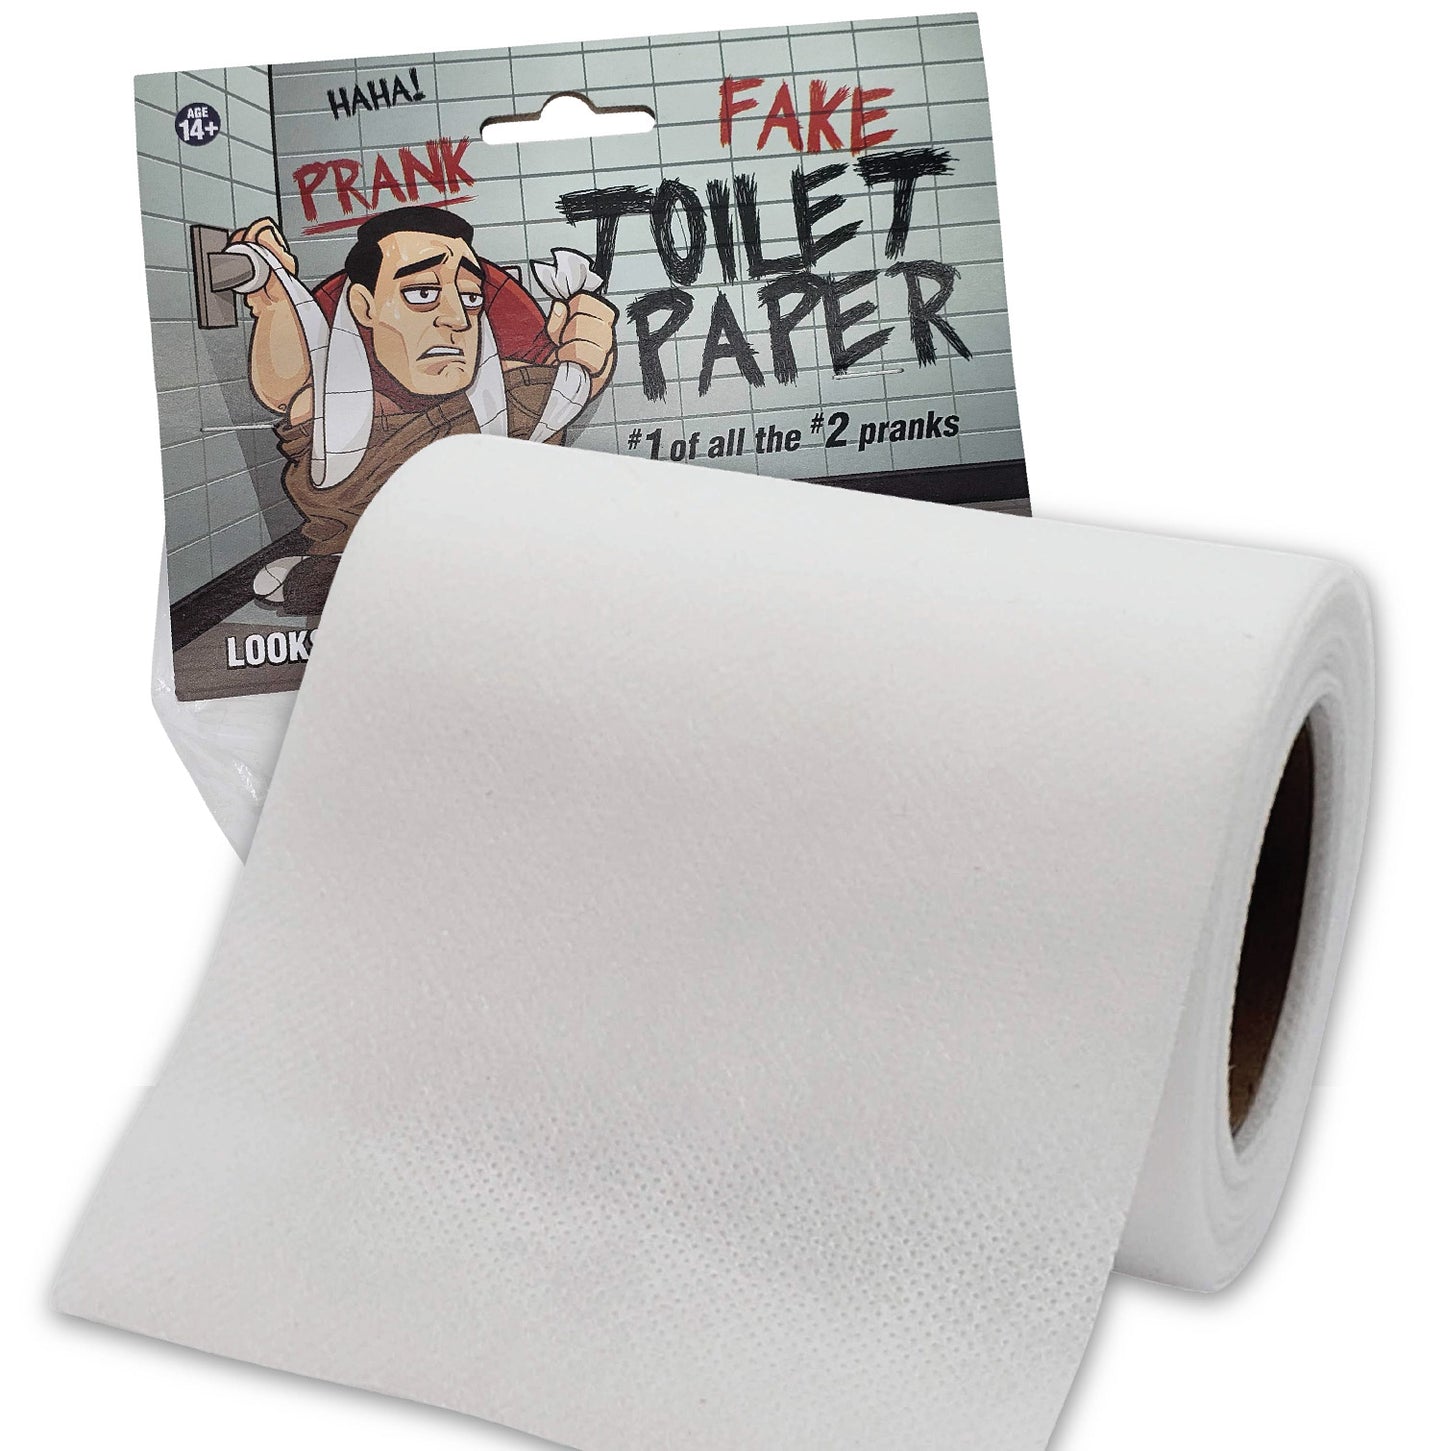 'No Tear' Funny Prank Toilet Paper - Impossible to Rip -Fake Novelty Stuff for Adults and Kids